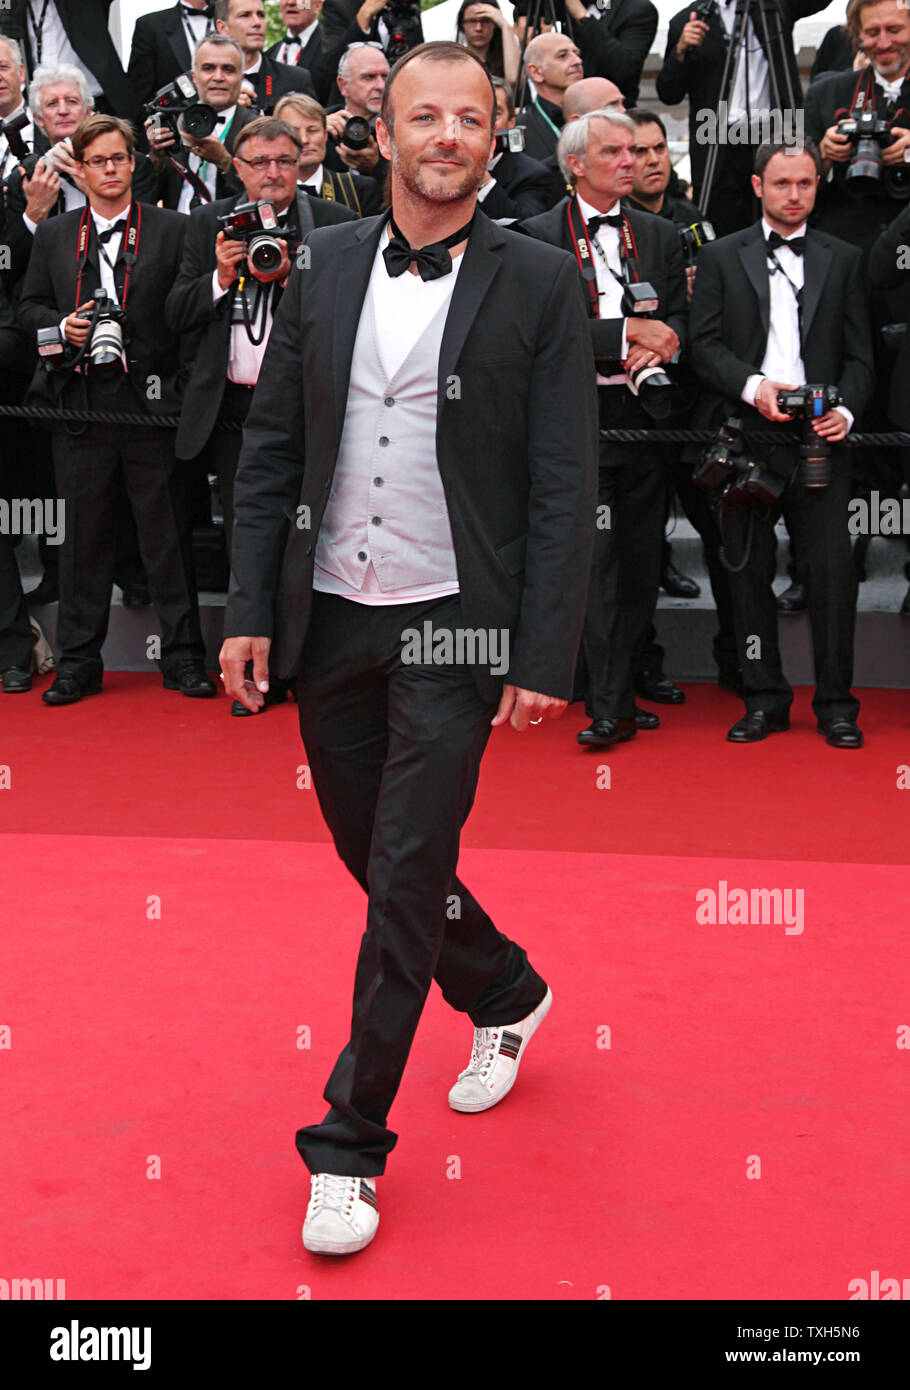 Pierre-Francois Martin-Laval arrives on the red carpet before the screening of the film 'Midnight in Paris' during the opening night of the 64th annual Cannes International Film Festival in Cannes, France on May 11, 2011.  UPI/David Silpa Stock Photo